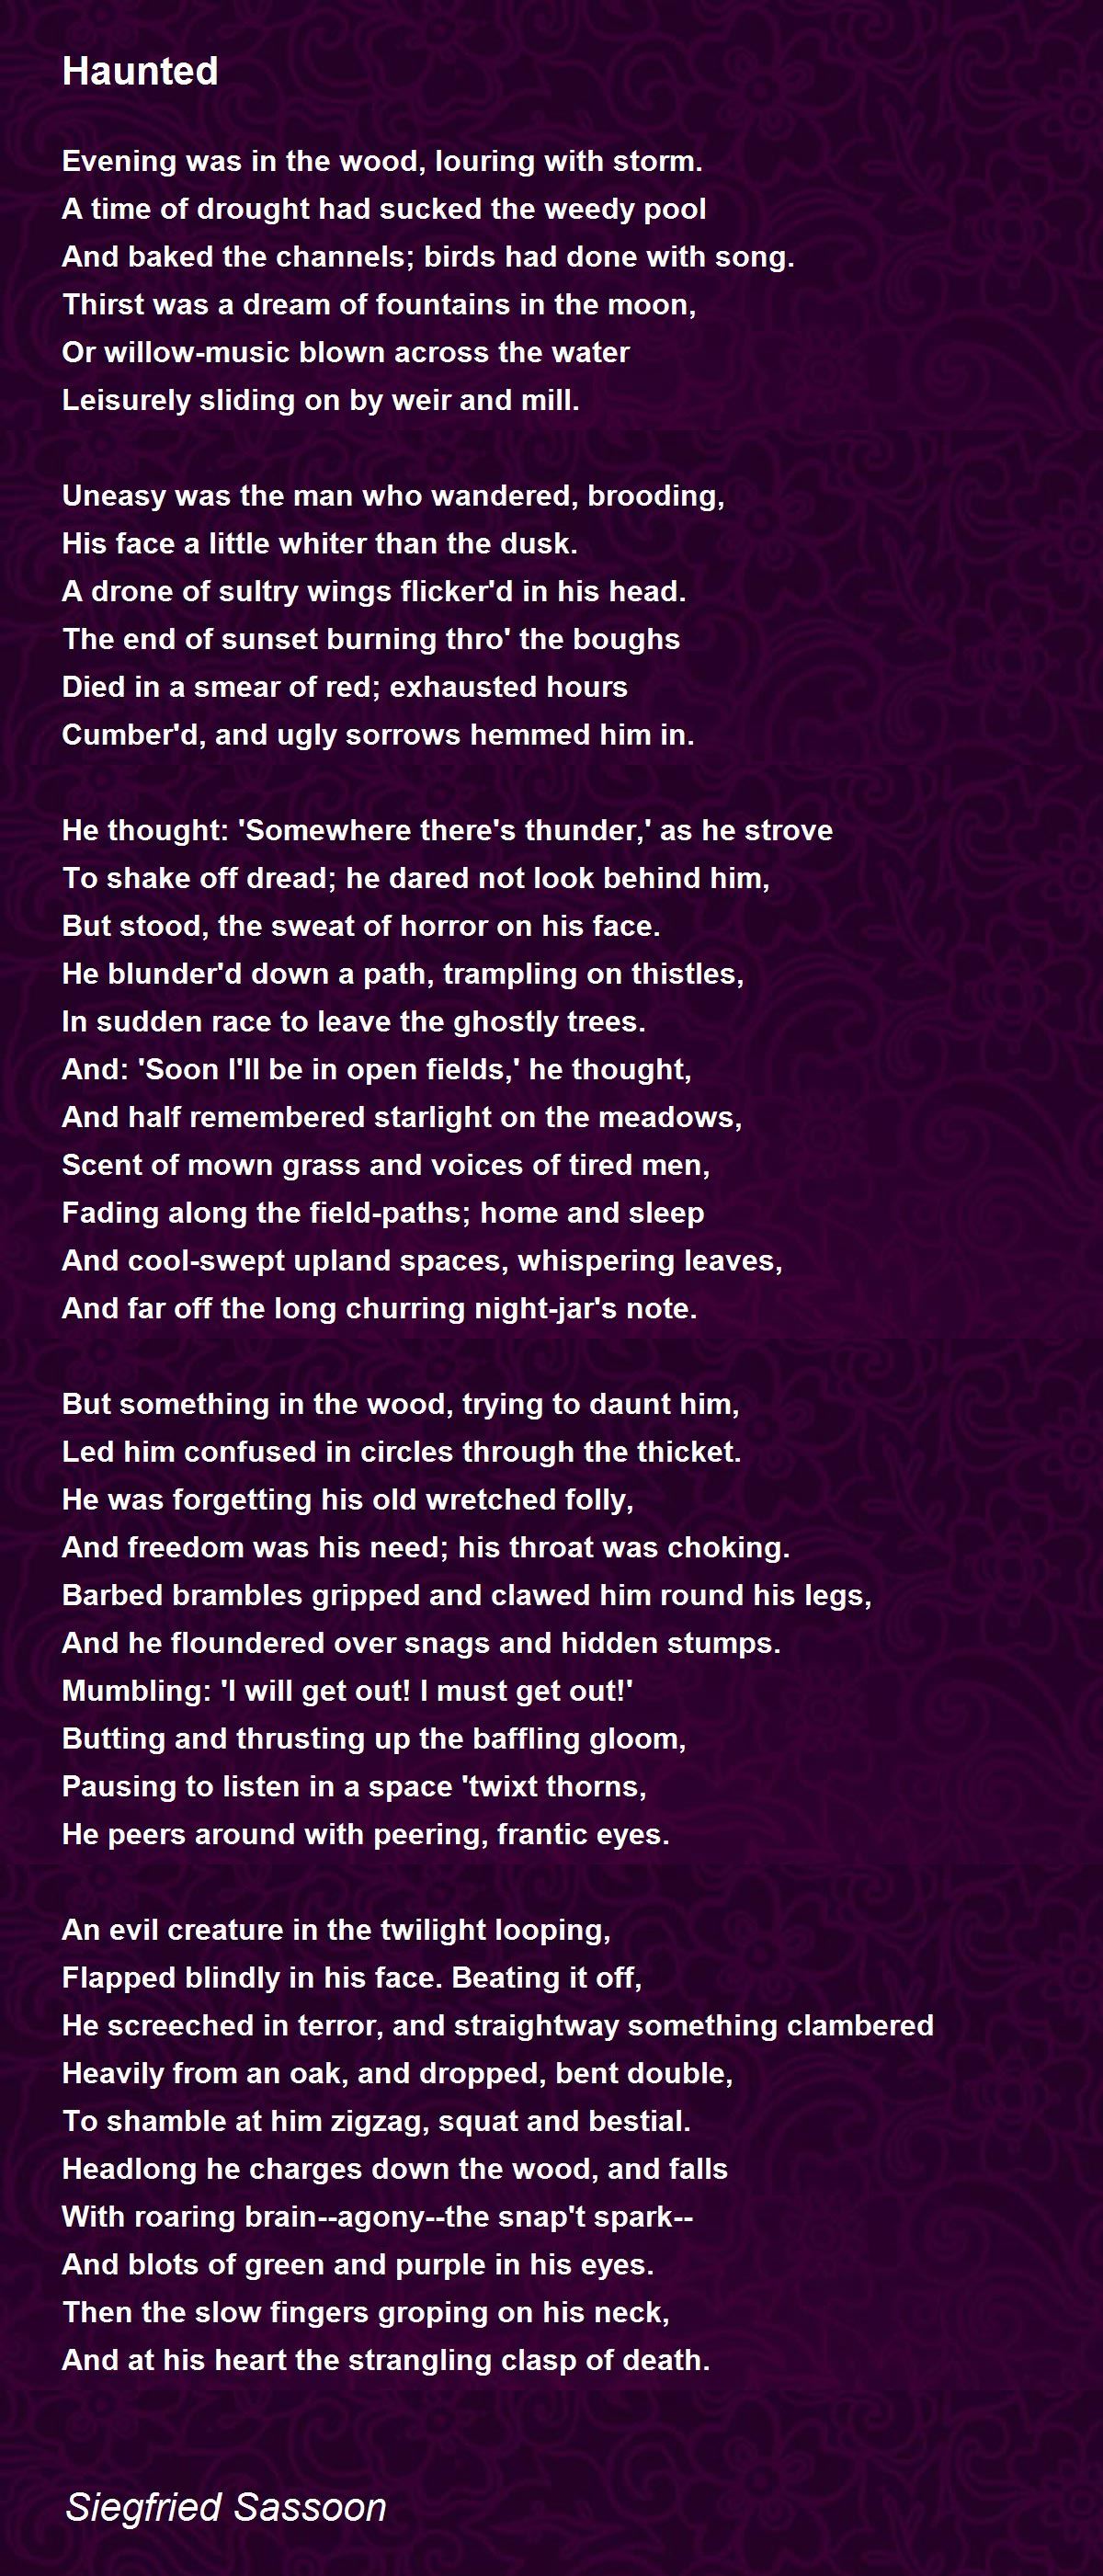 Haunted Poem by Siegfried Sassoon - Poem Hunter Comments